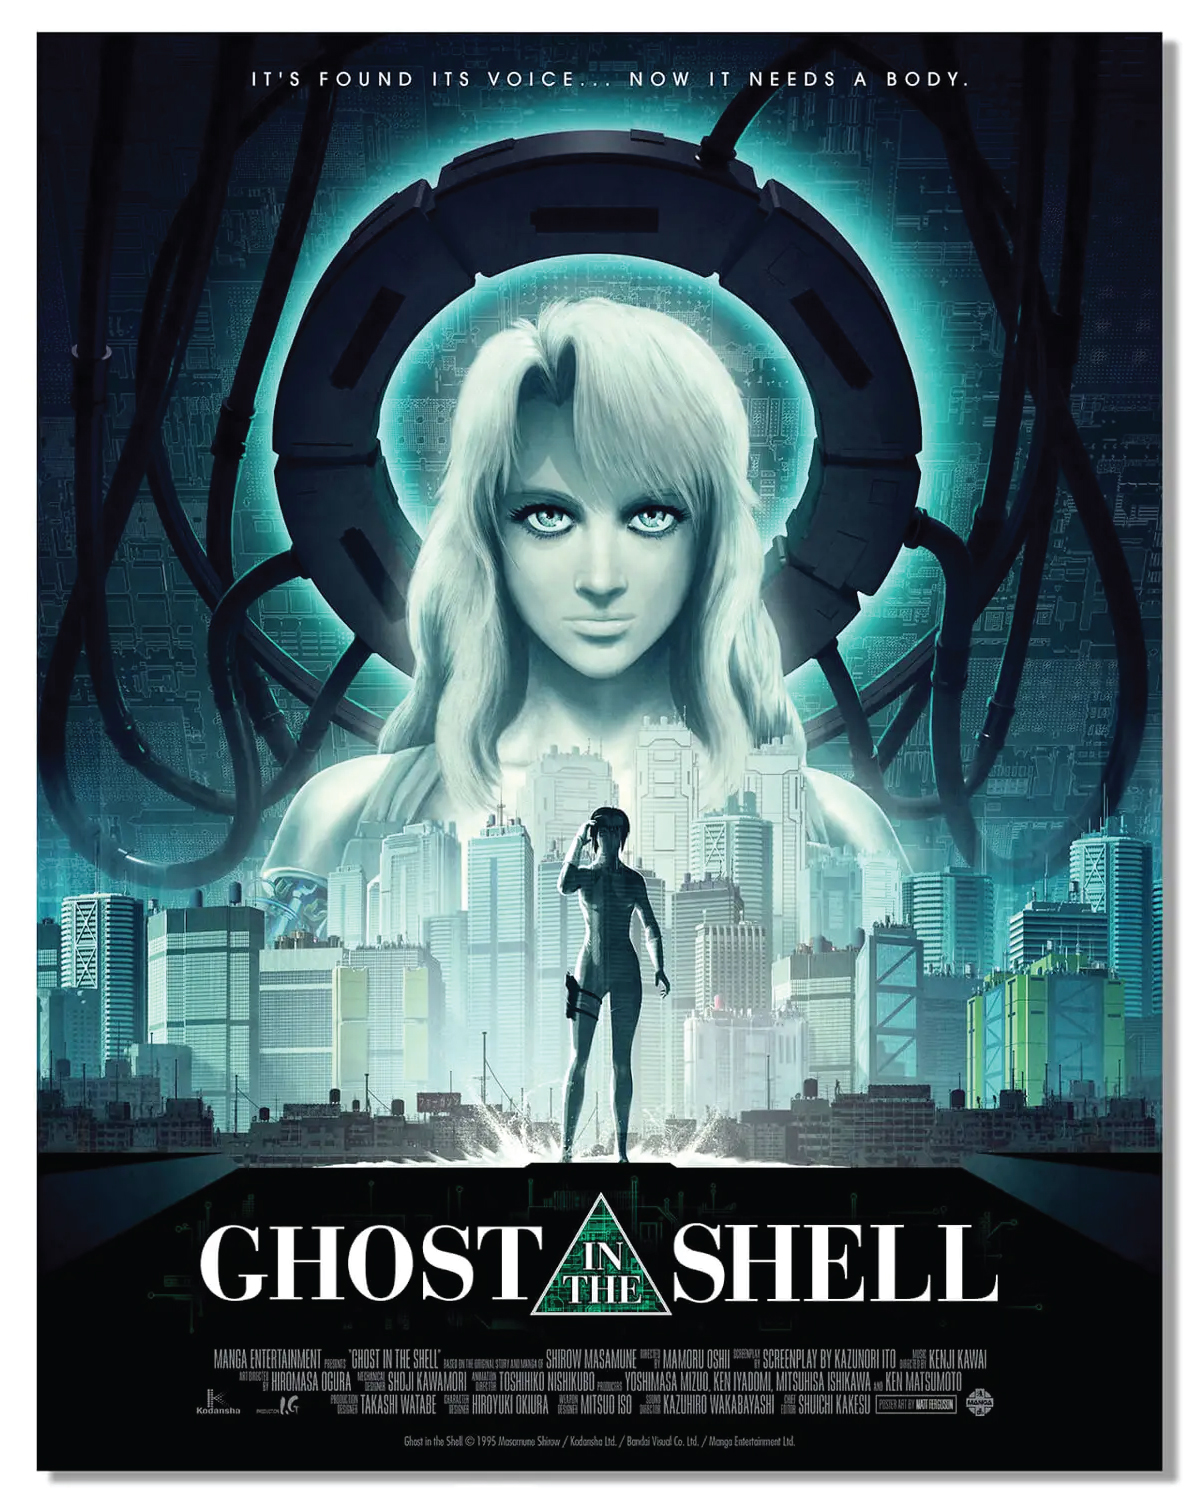 Ghost in the Shell 4K Ultra HD Limited Edition Steelbook & Standard Listed  for UK Release • Anime UK News